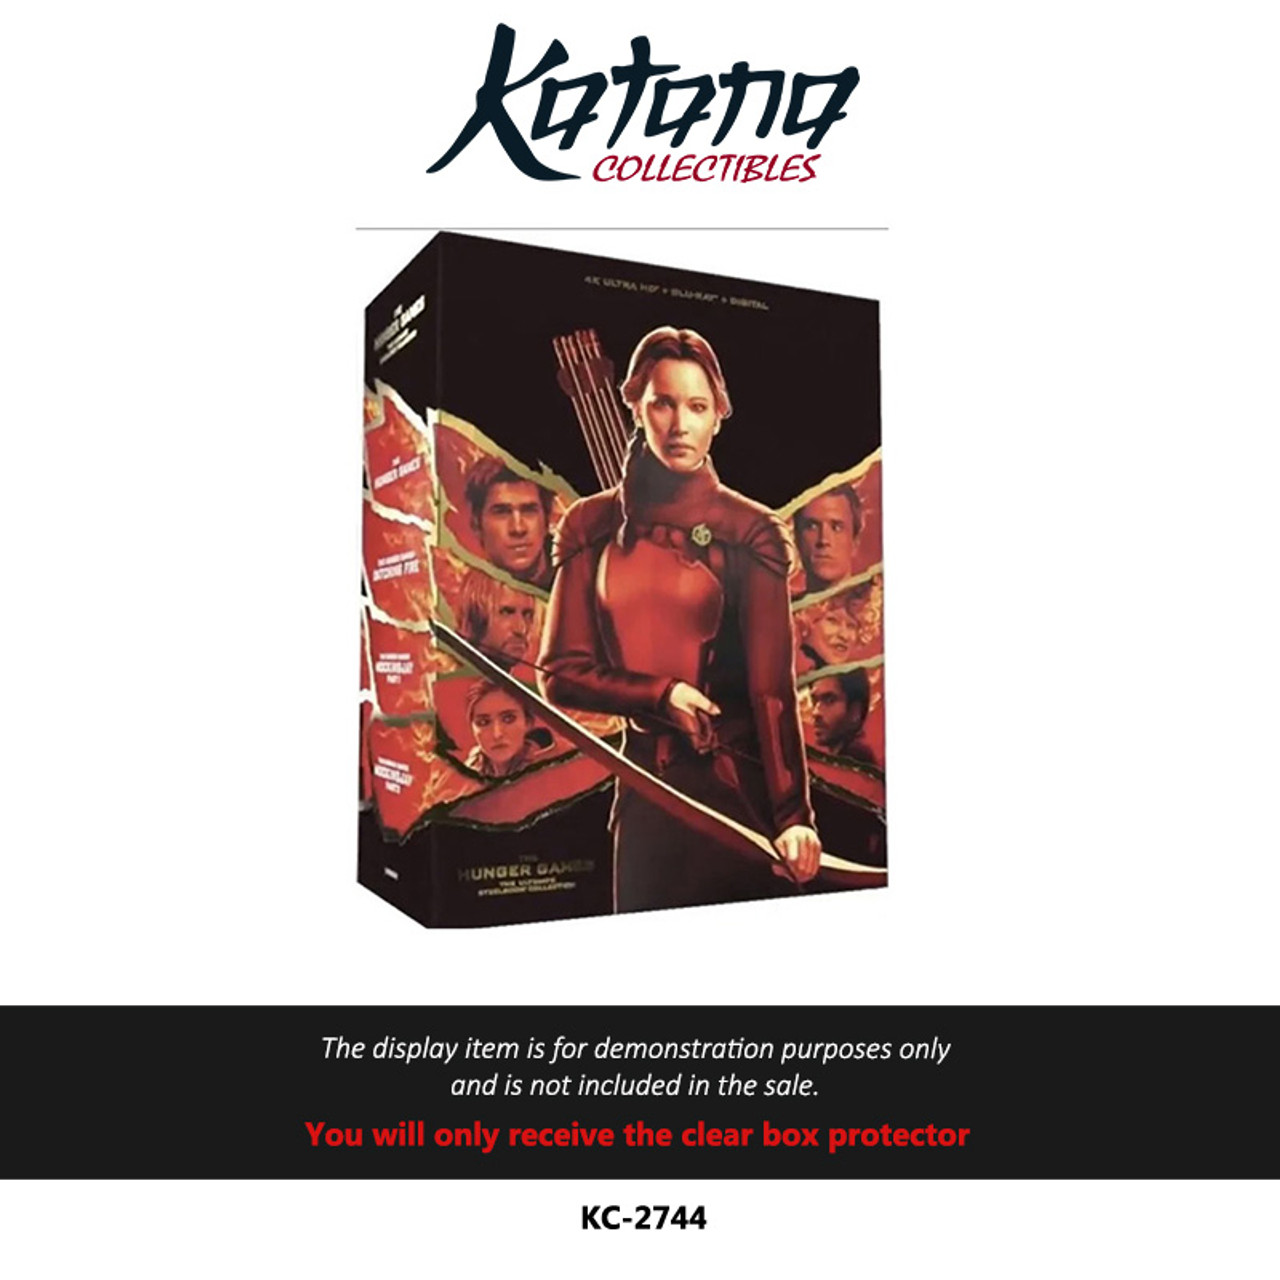 Protector For The Hunger Games: Ultimate 4K Steelbook Collection - Katana  Collectibles